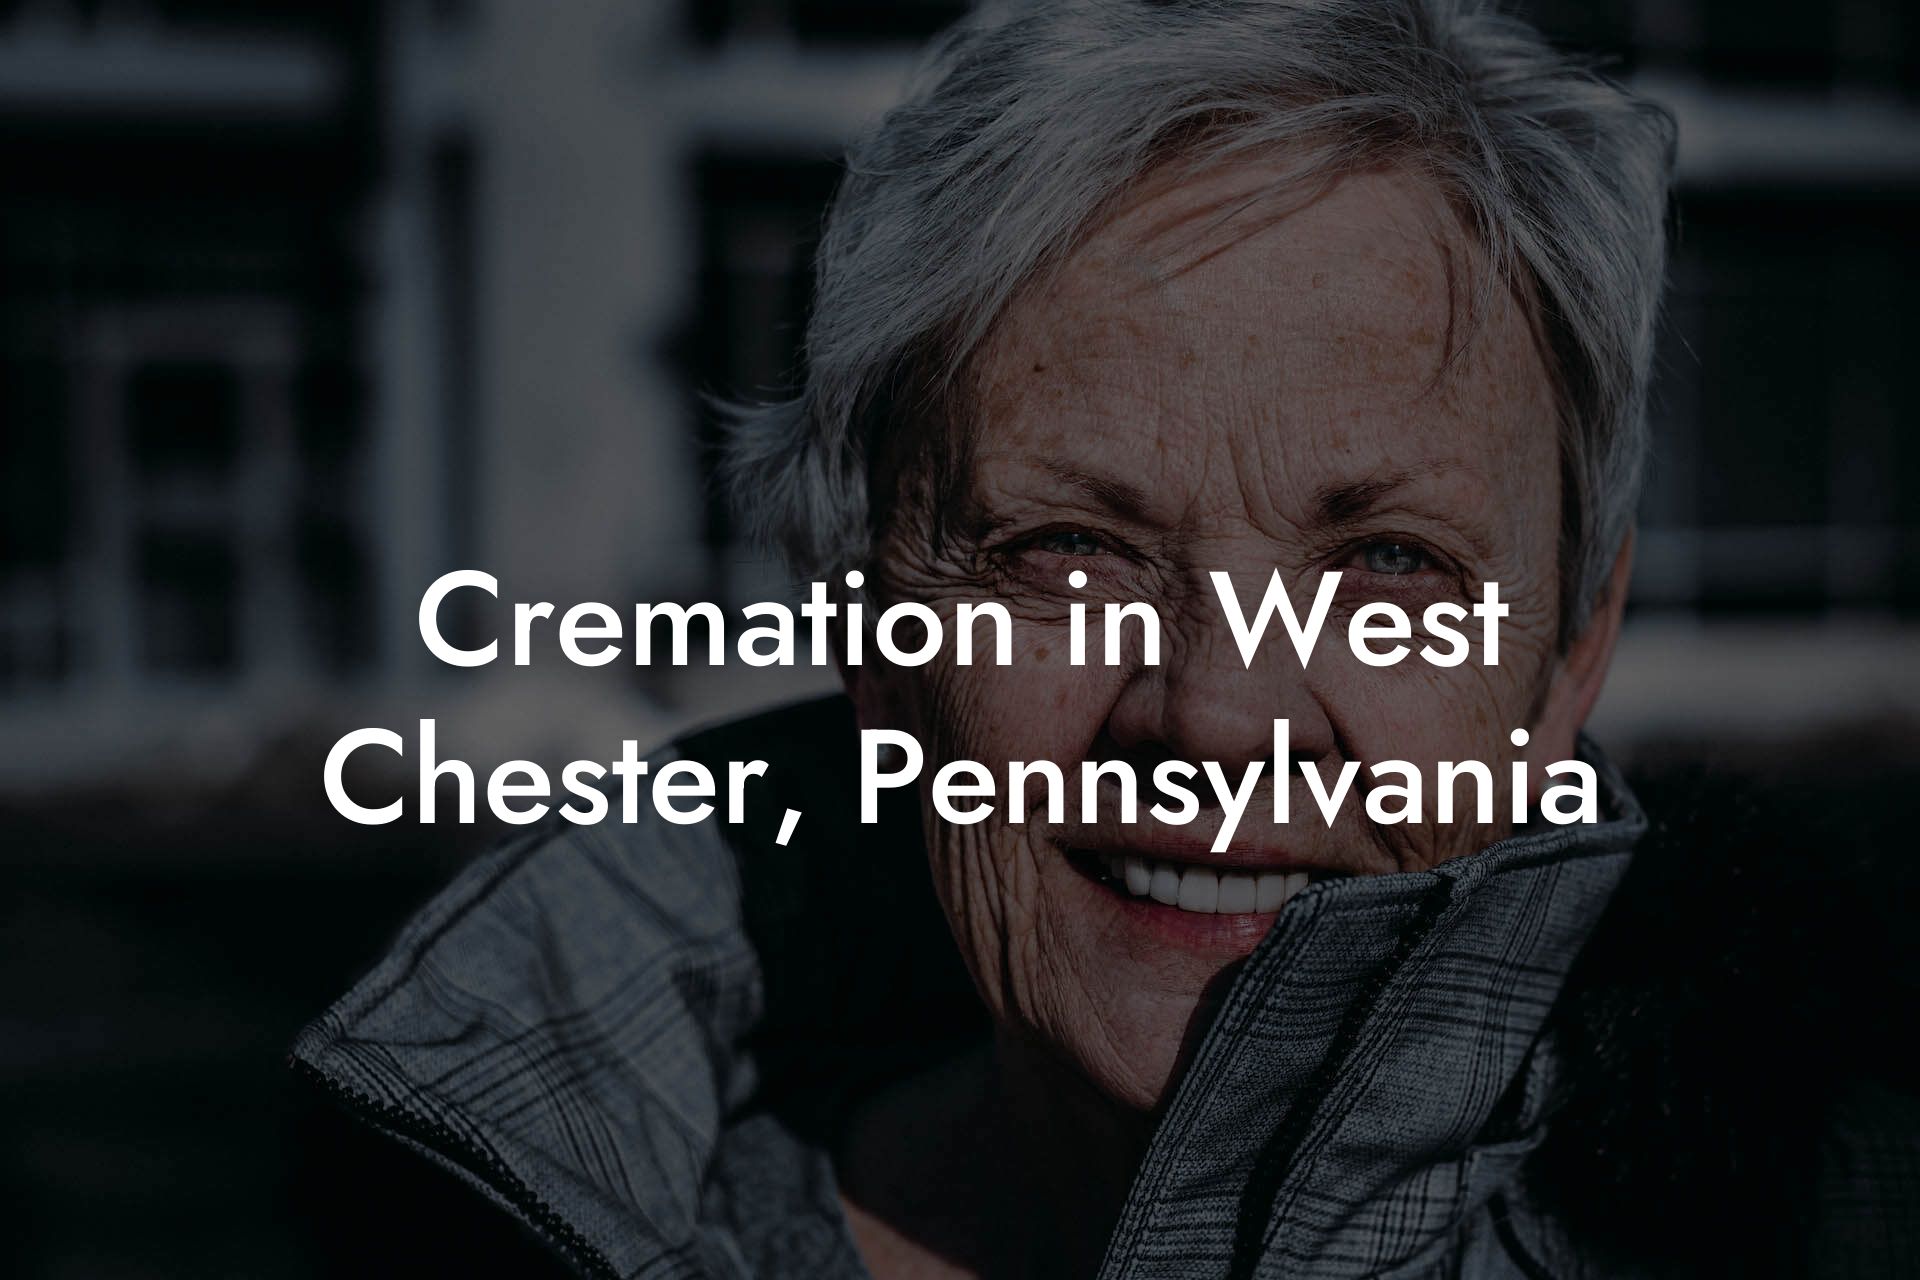 Cremation in West Chester, Pennsylvania